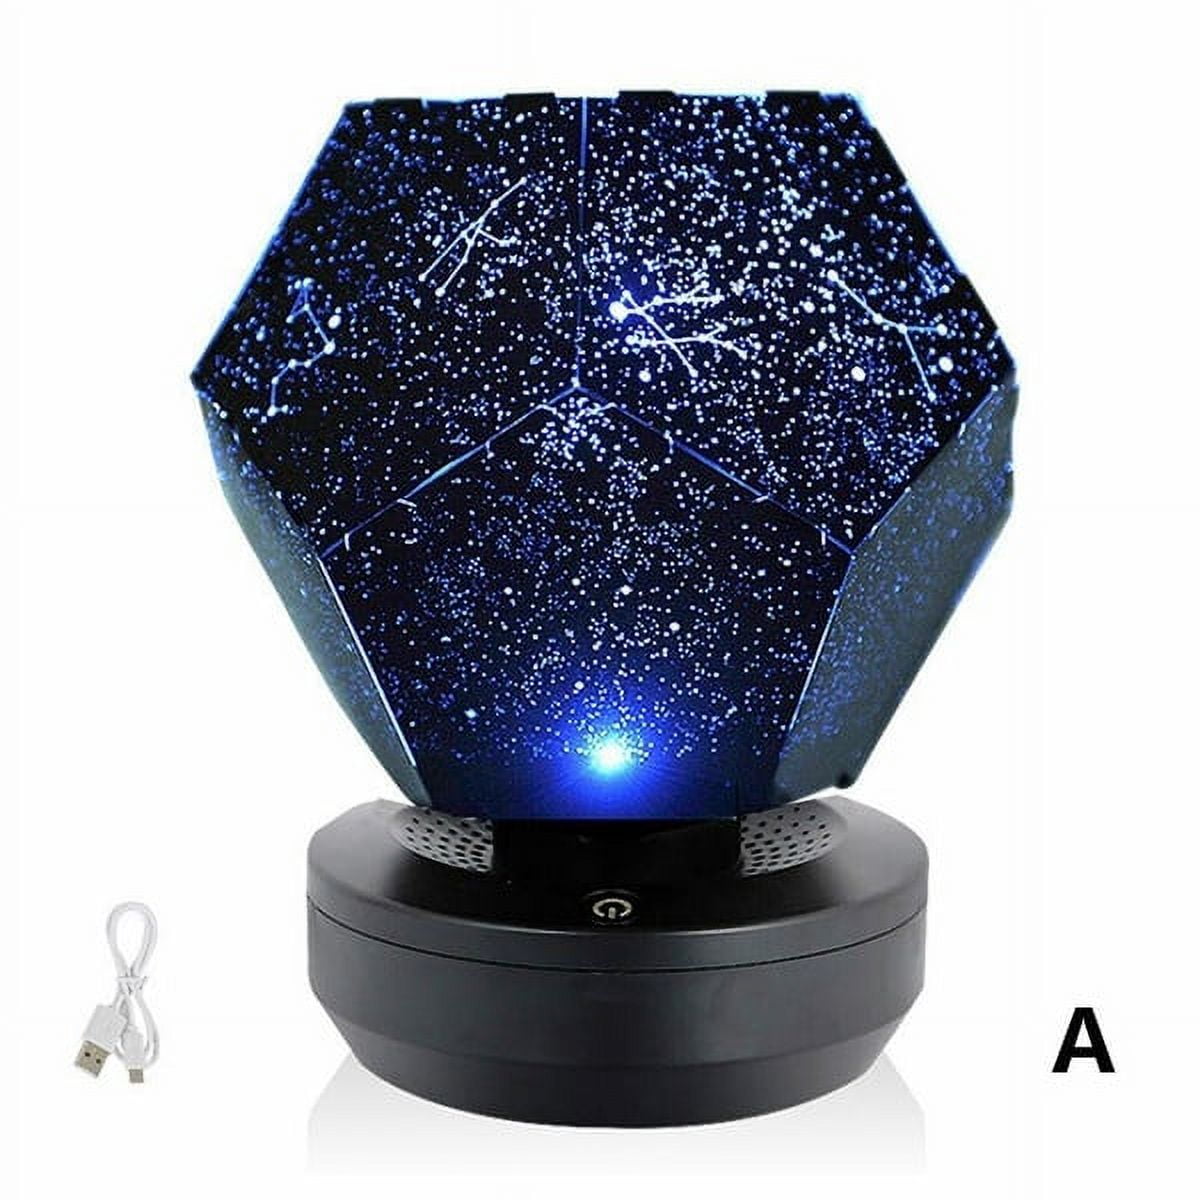 Romantic LED Starry Night Lamp 3D Star Projector Light for